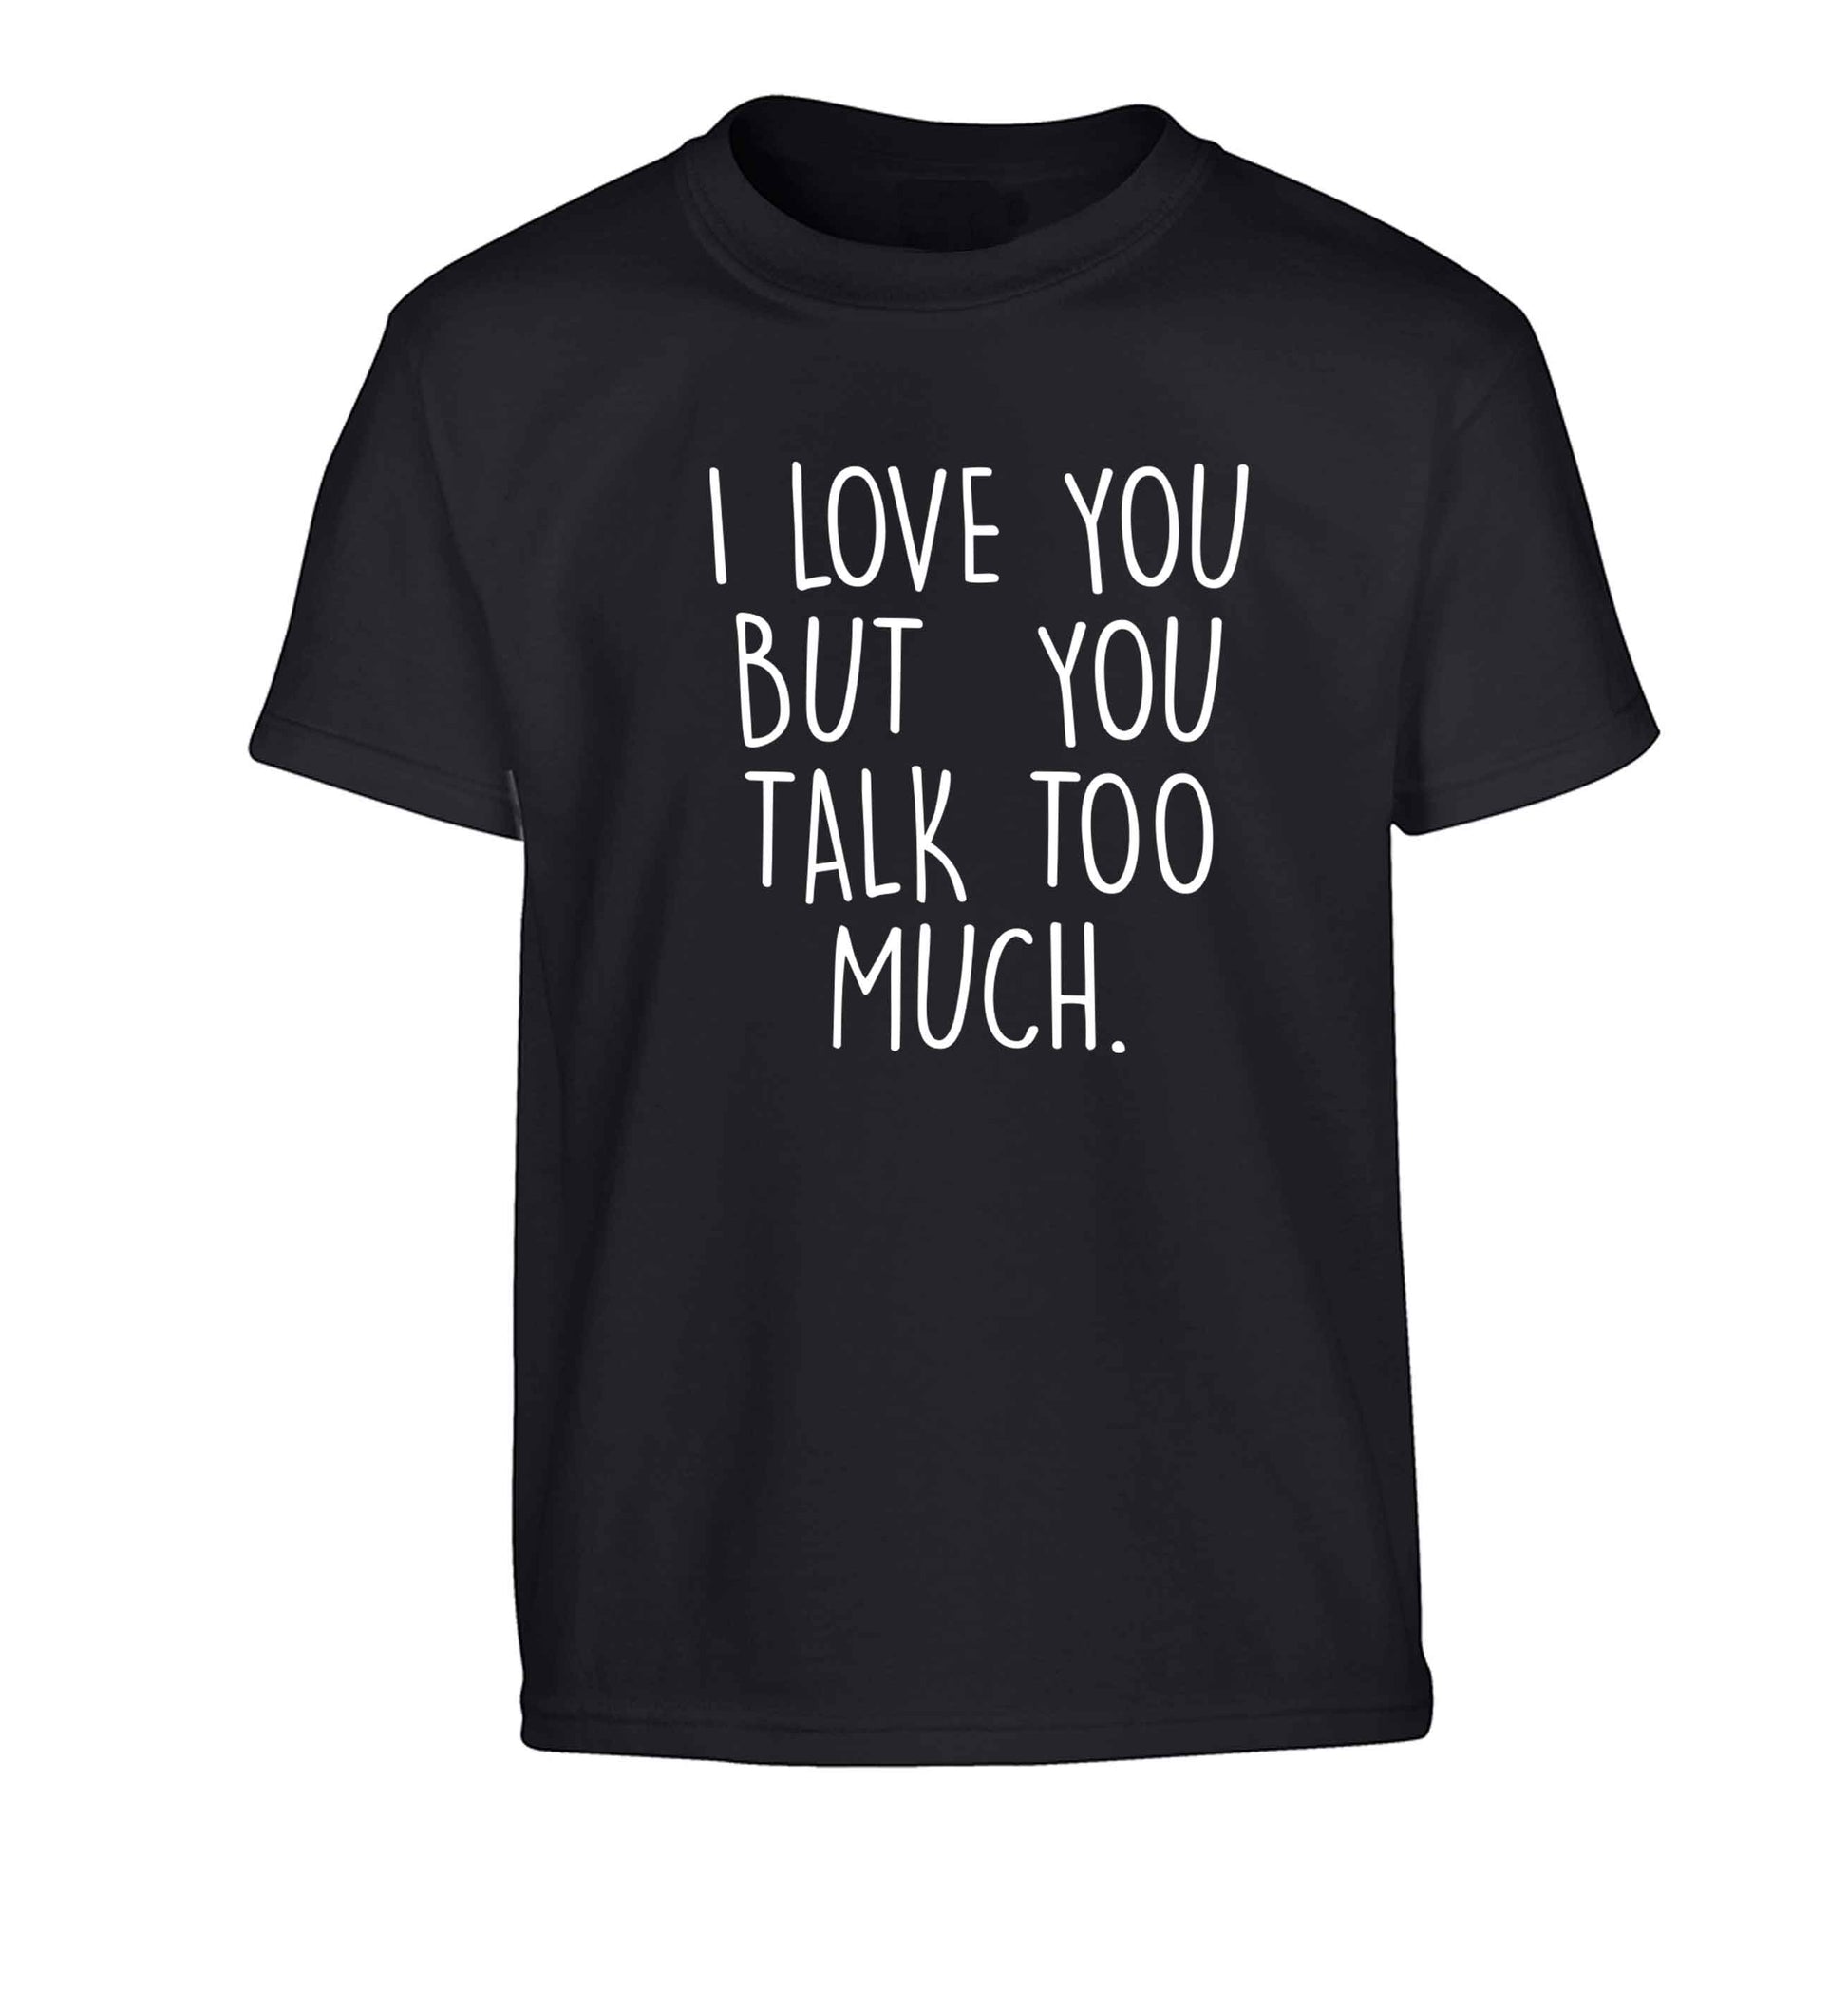 I love you but you talk too much Children's black Tshirt 12-13 Years